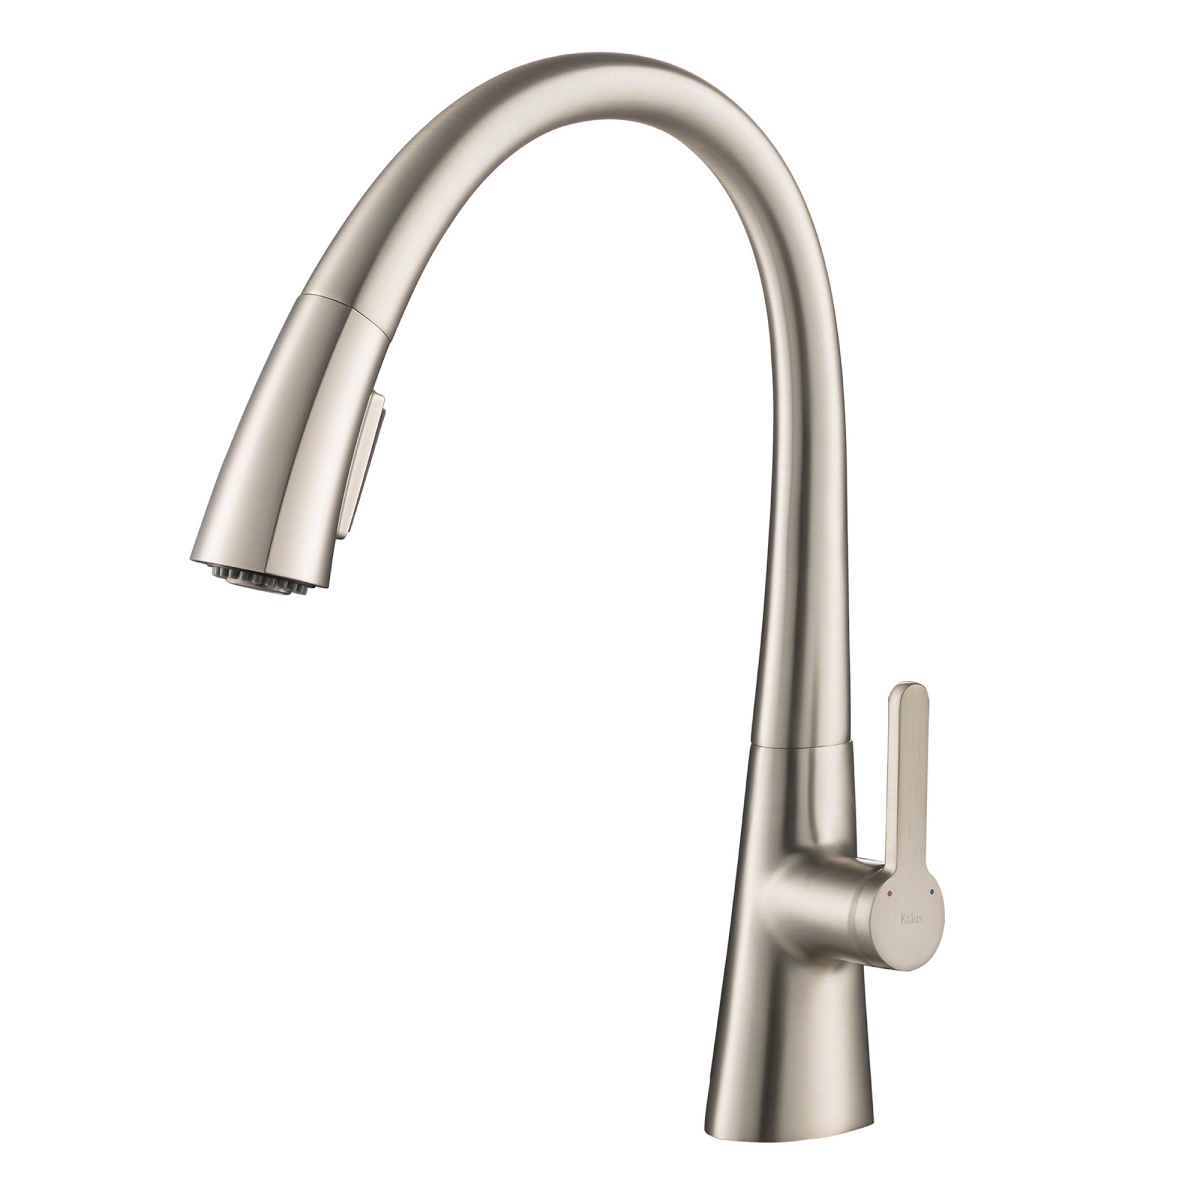 Kraus Usa Kpf-1673sfs Nolen Single Handle Pull Down Kitchen Faucet With Dual Function Sprayhead In All-brite Spot - Stainless Steel